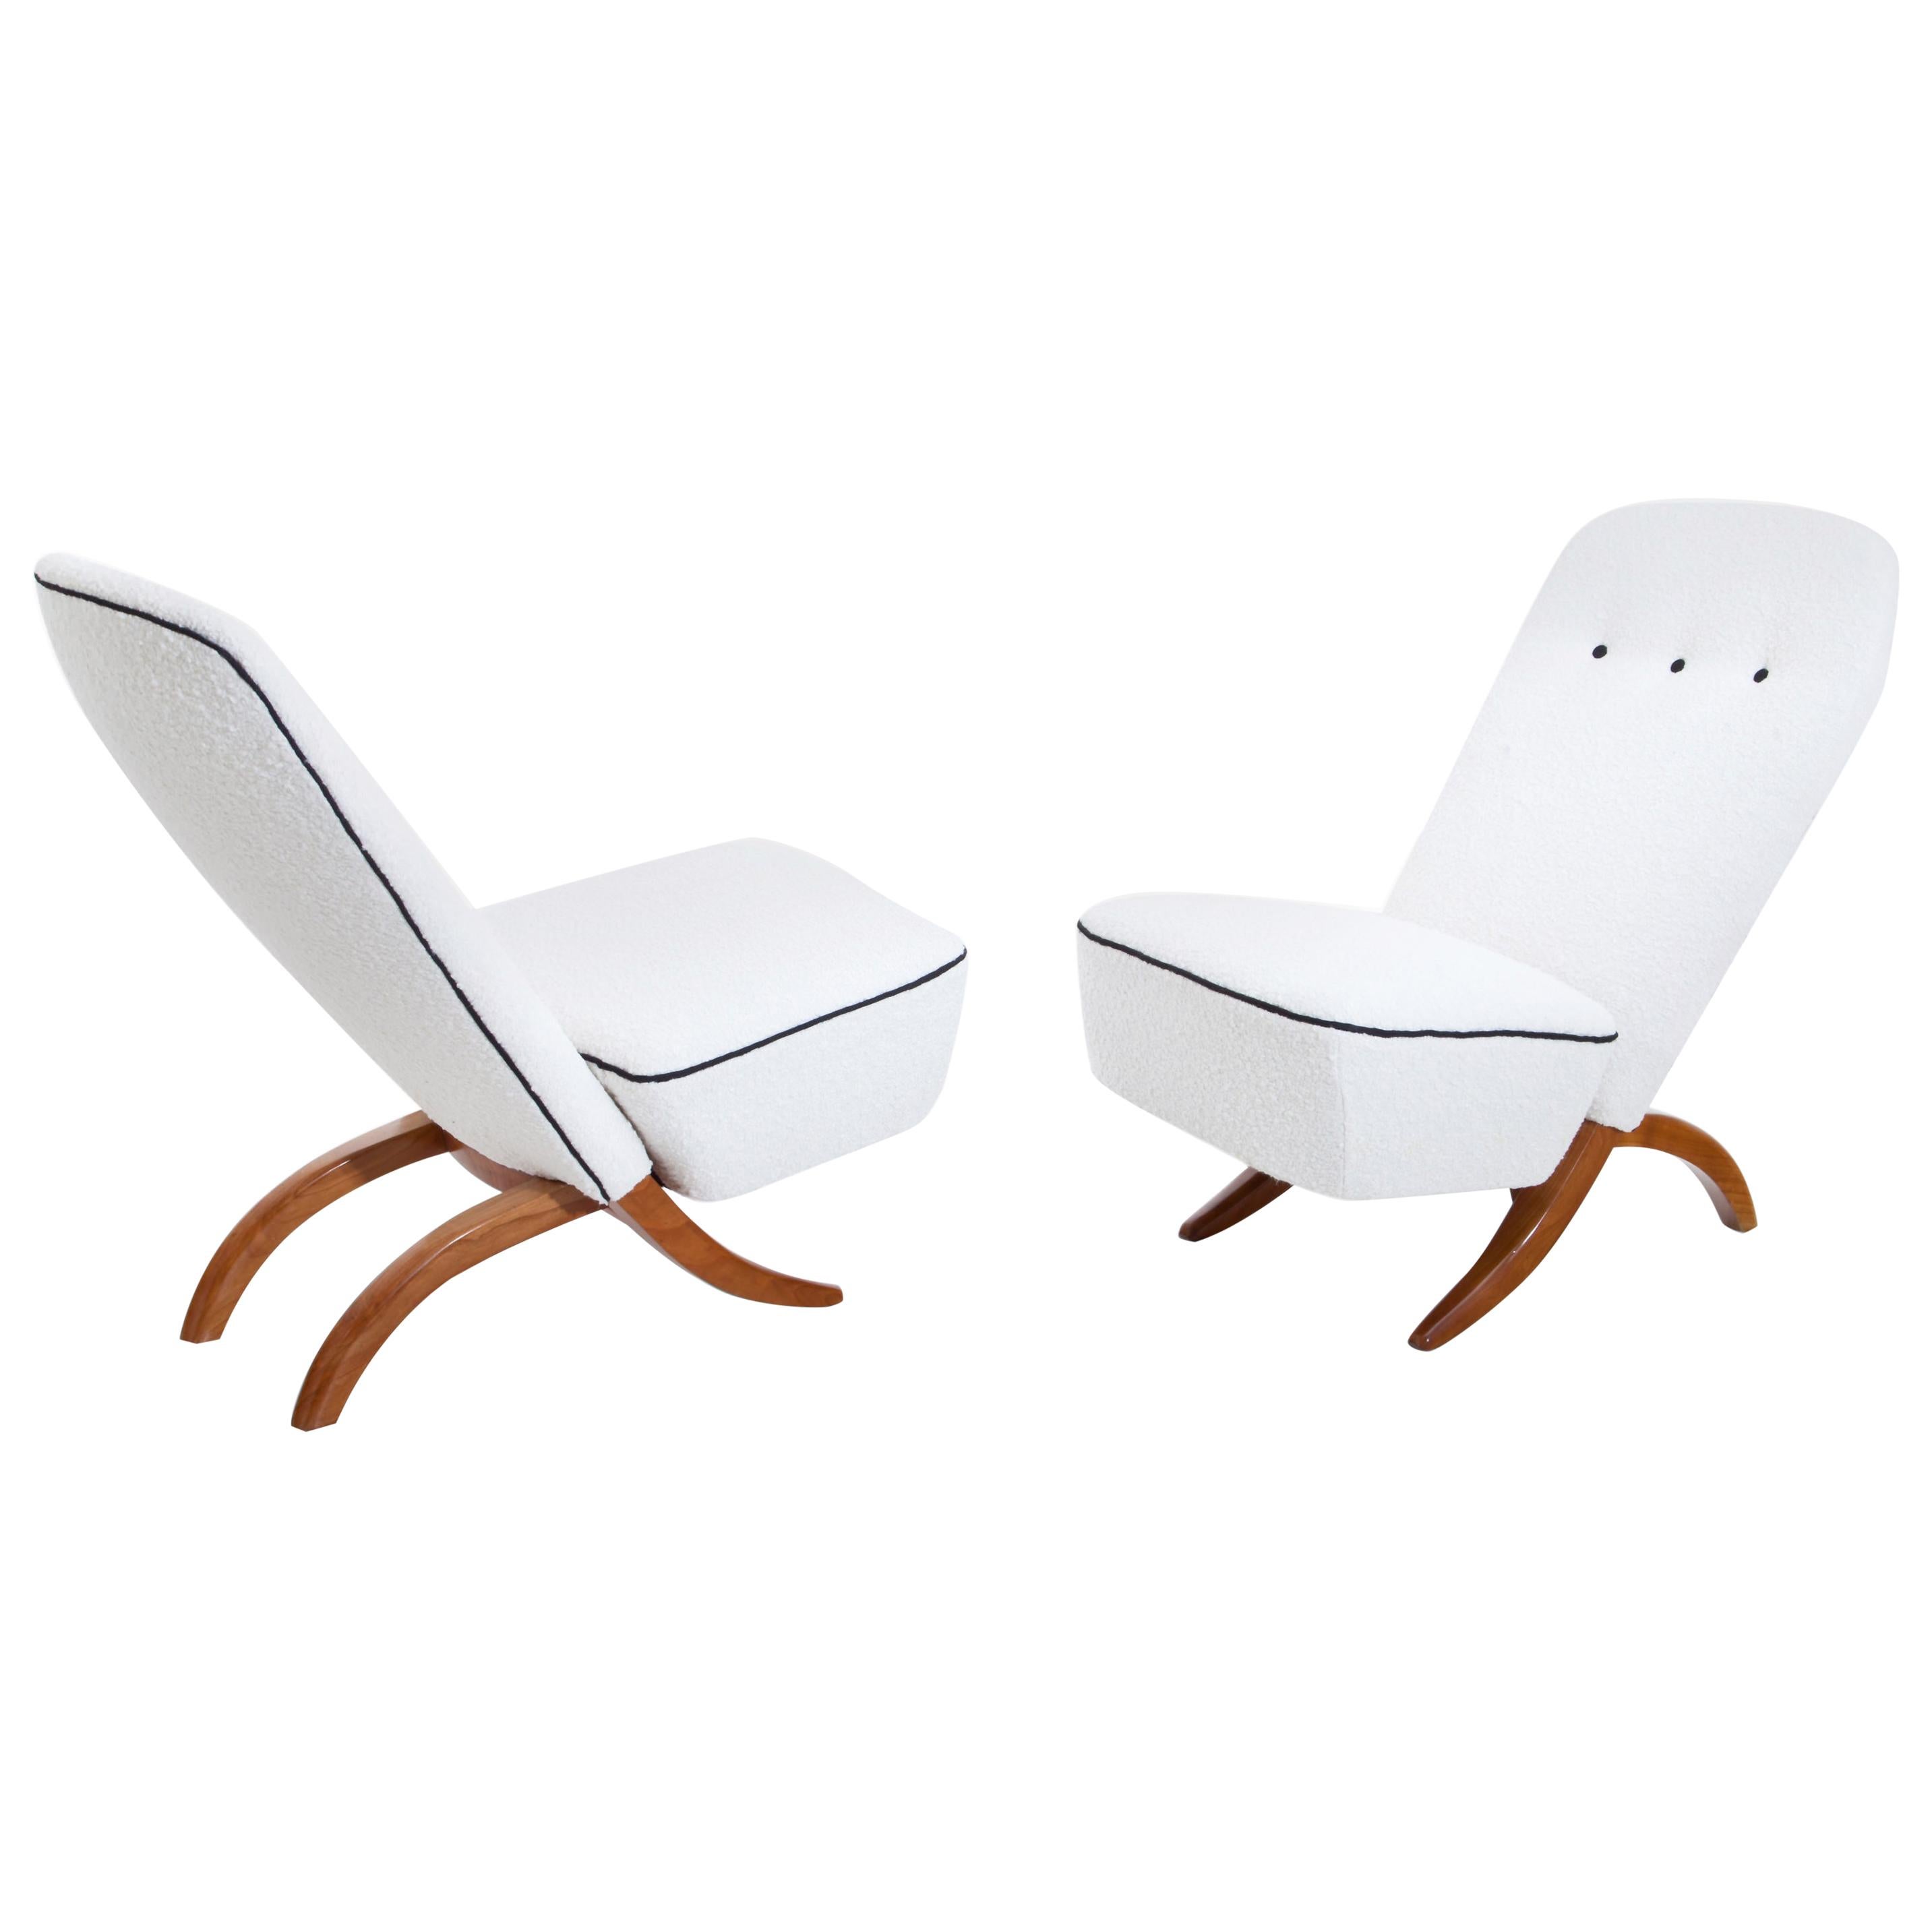 Dux Lounge Chairs, Sweden, Mid-20th Century